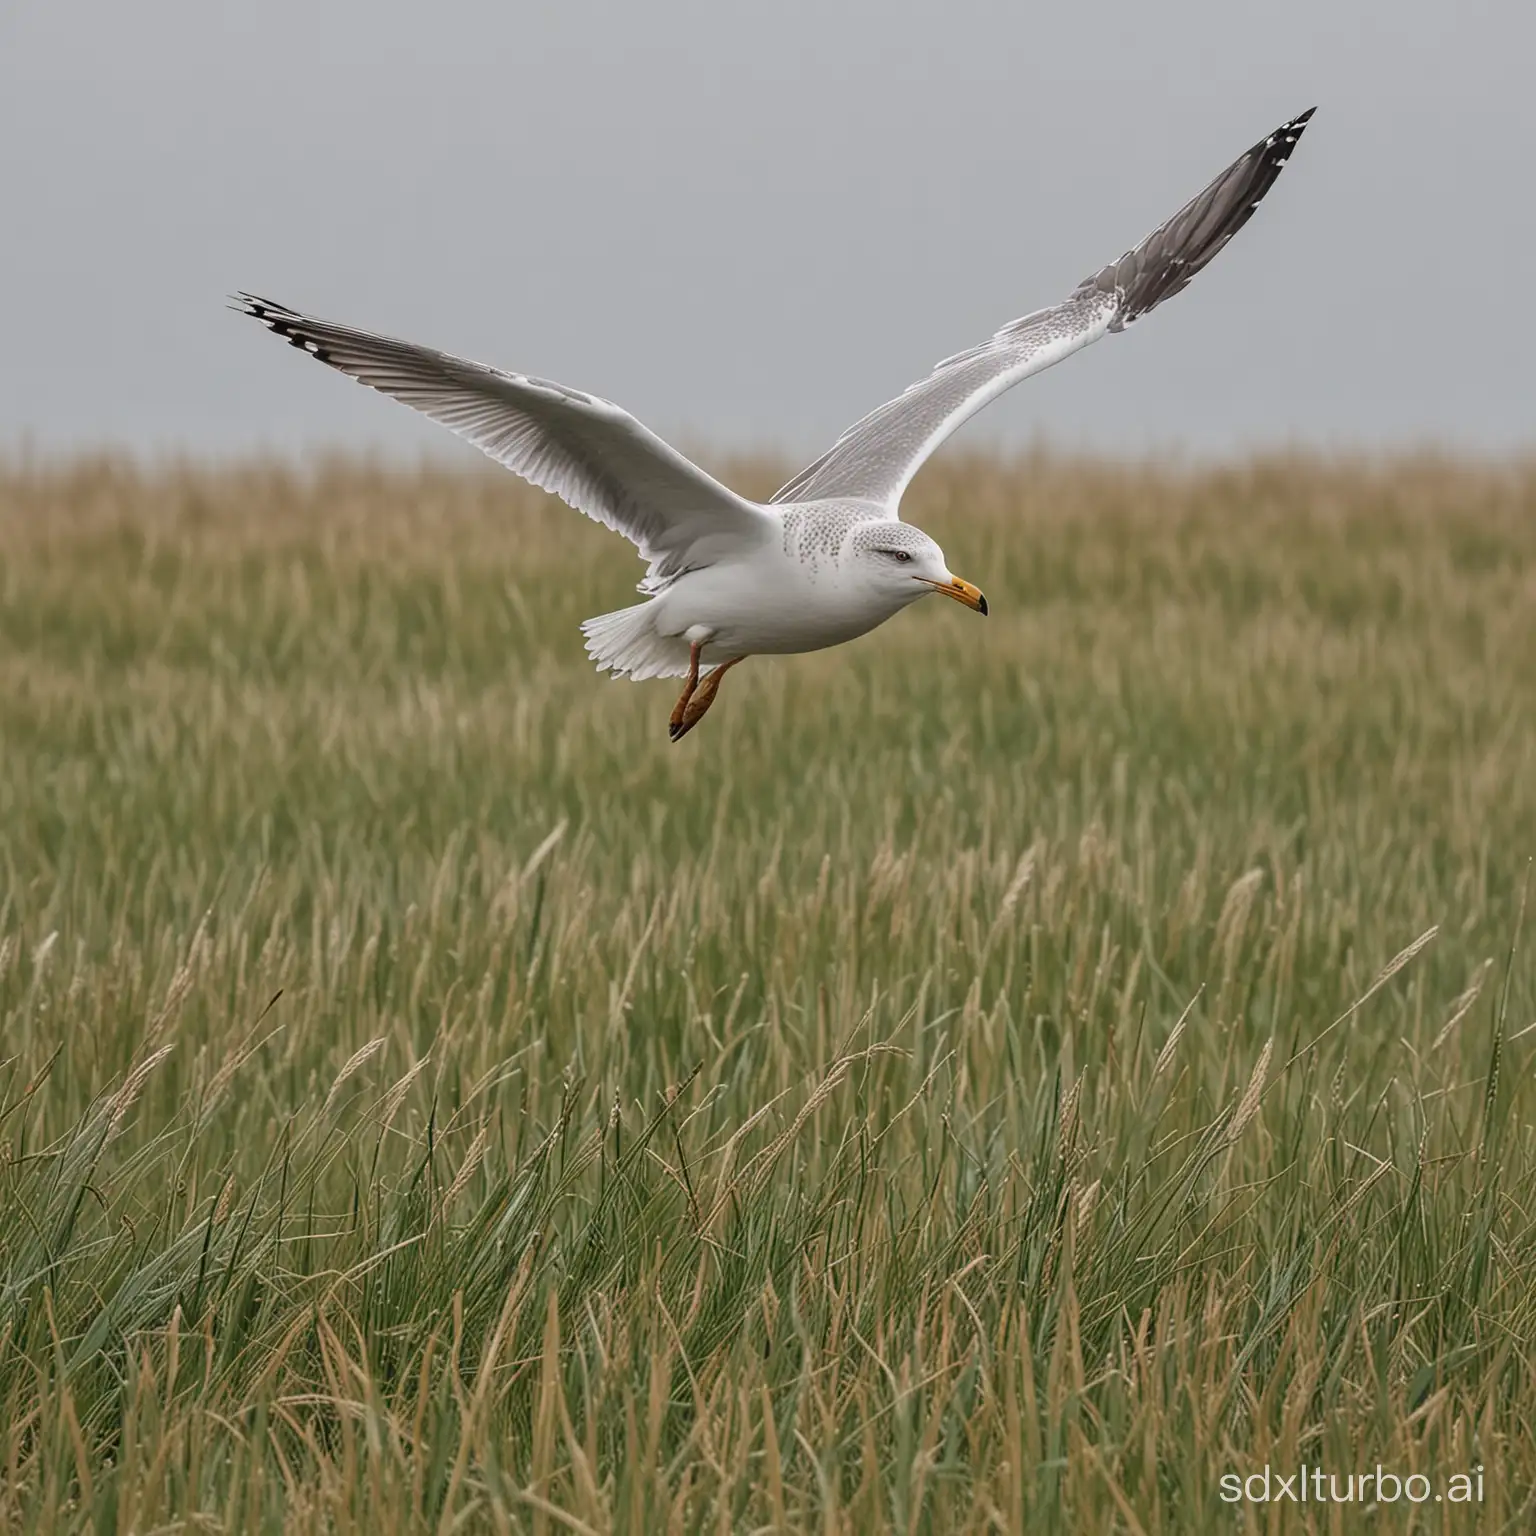 A solitary seagull swoops low across a windswept field, wings outstretched, captured in motion, grass sways beneath, overcast sky, sense of freedom, spirit captured mid-flight, Sony A9 II, 400mm lens at f/4, 1/2500 shutter speed, --style random --stylize 100 --weird 750 --ar 16:9 --v 6